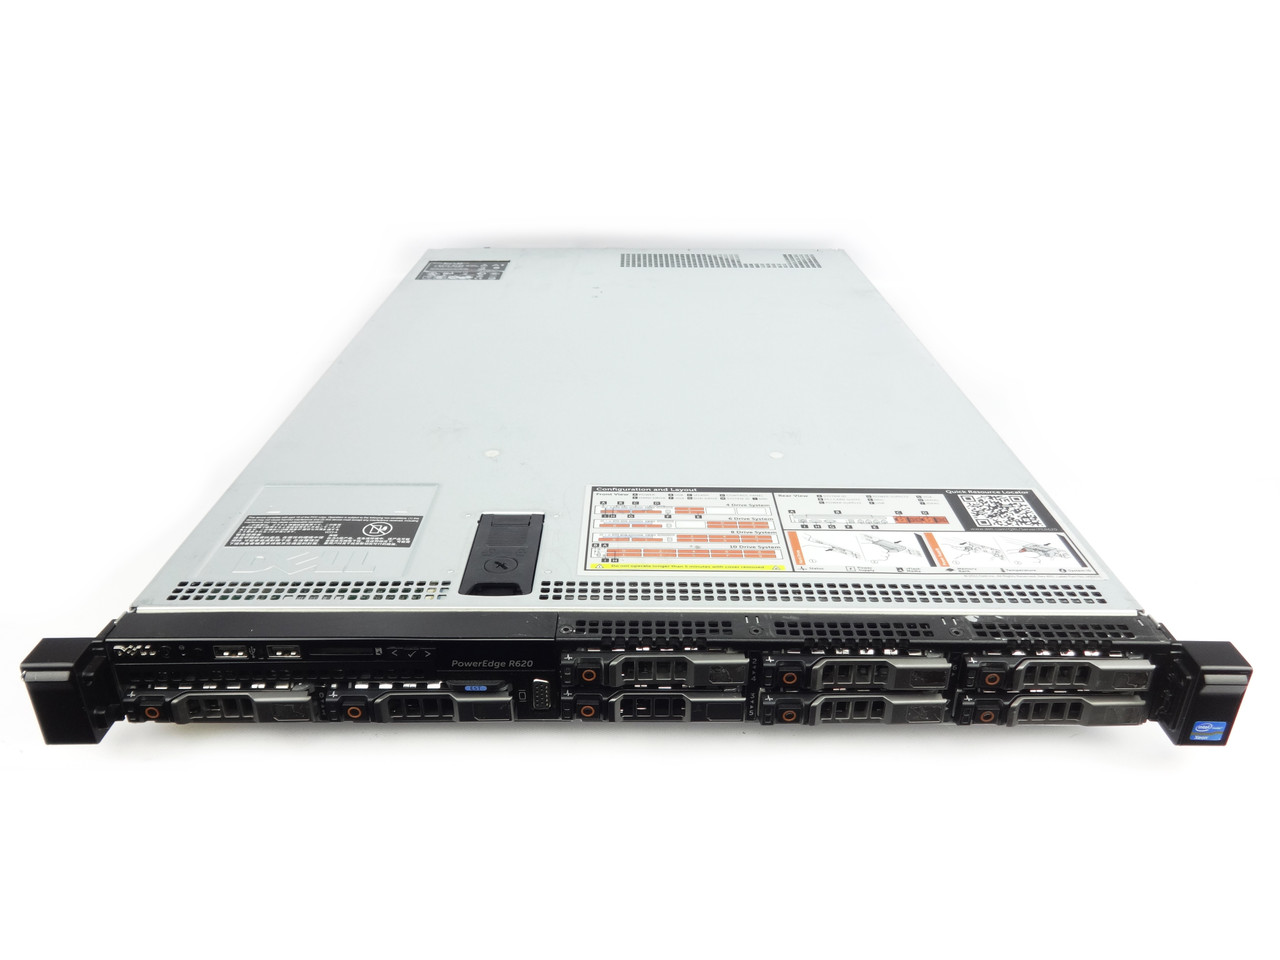 Dell Poweredge R620 8x 2.5" Server Build to Order